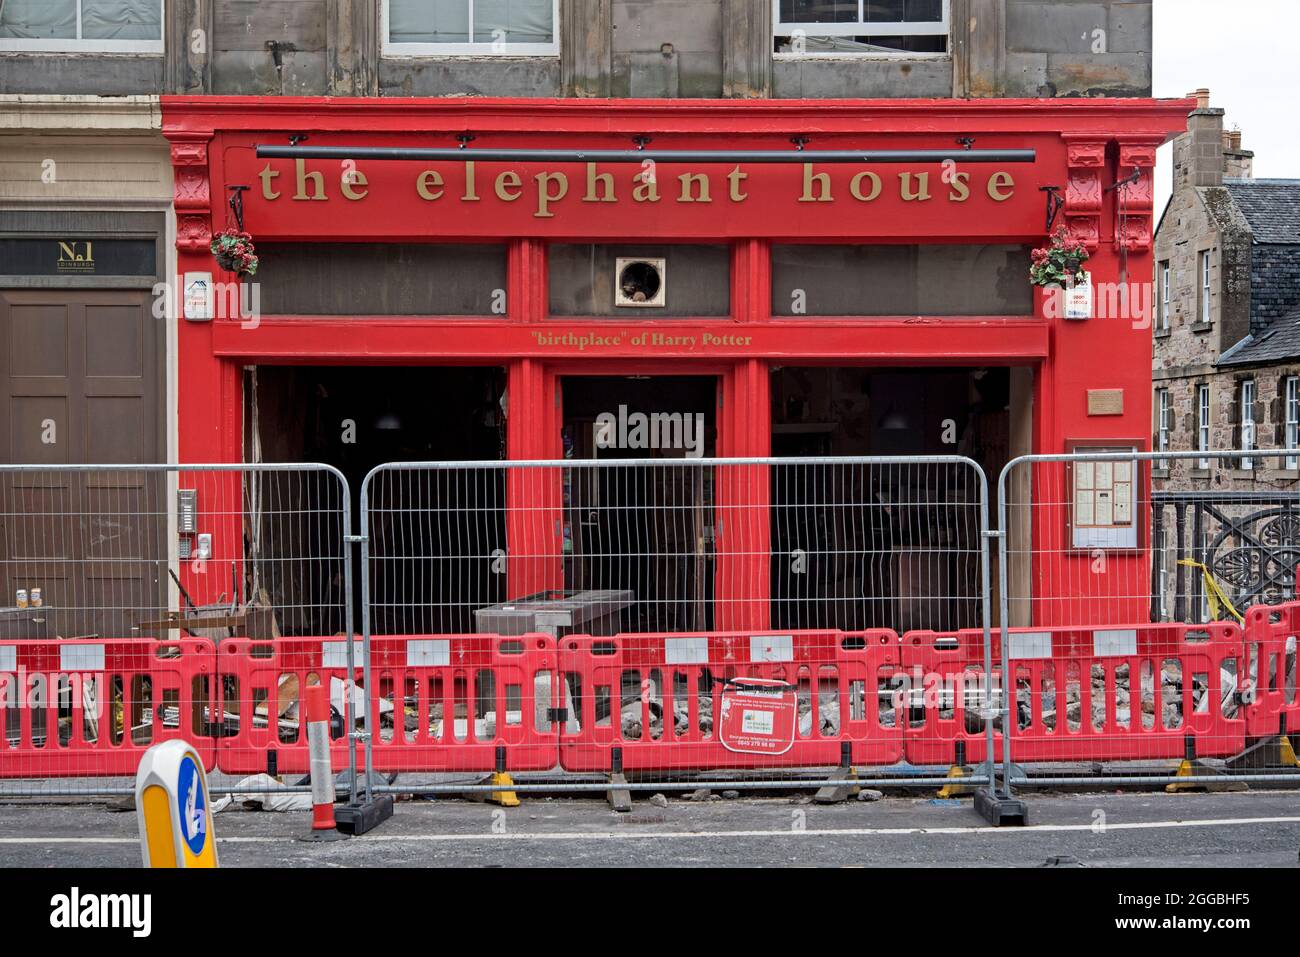 The Elephant House on George IV Bridge, Edinburgh, fenced off following a major fire which started in Patisserie Valerie next door. Stock Photo